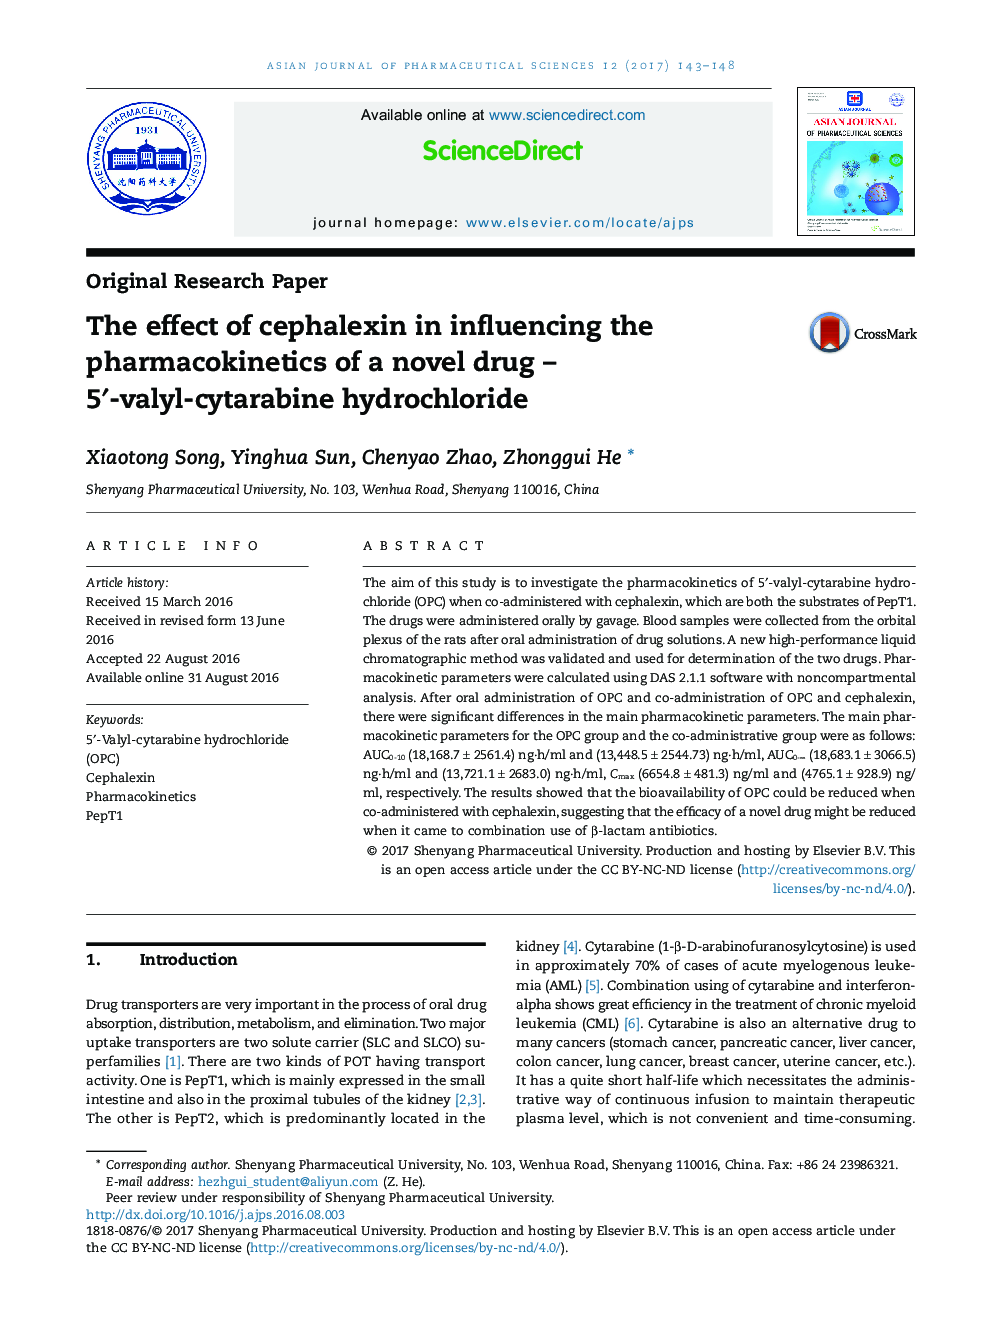 The effect of cephalexin in influencing the pharmacokinetics of a novel drug - 5â²-valyl-cytarabine hydrochloride